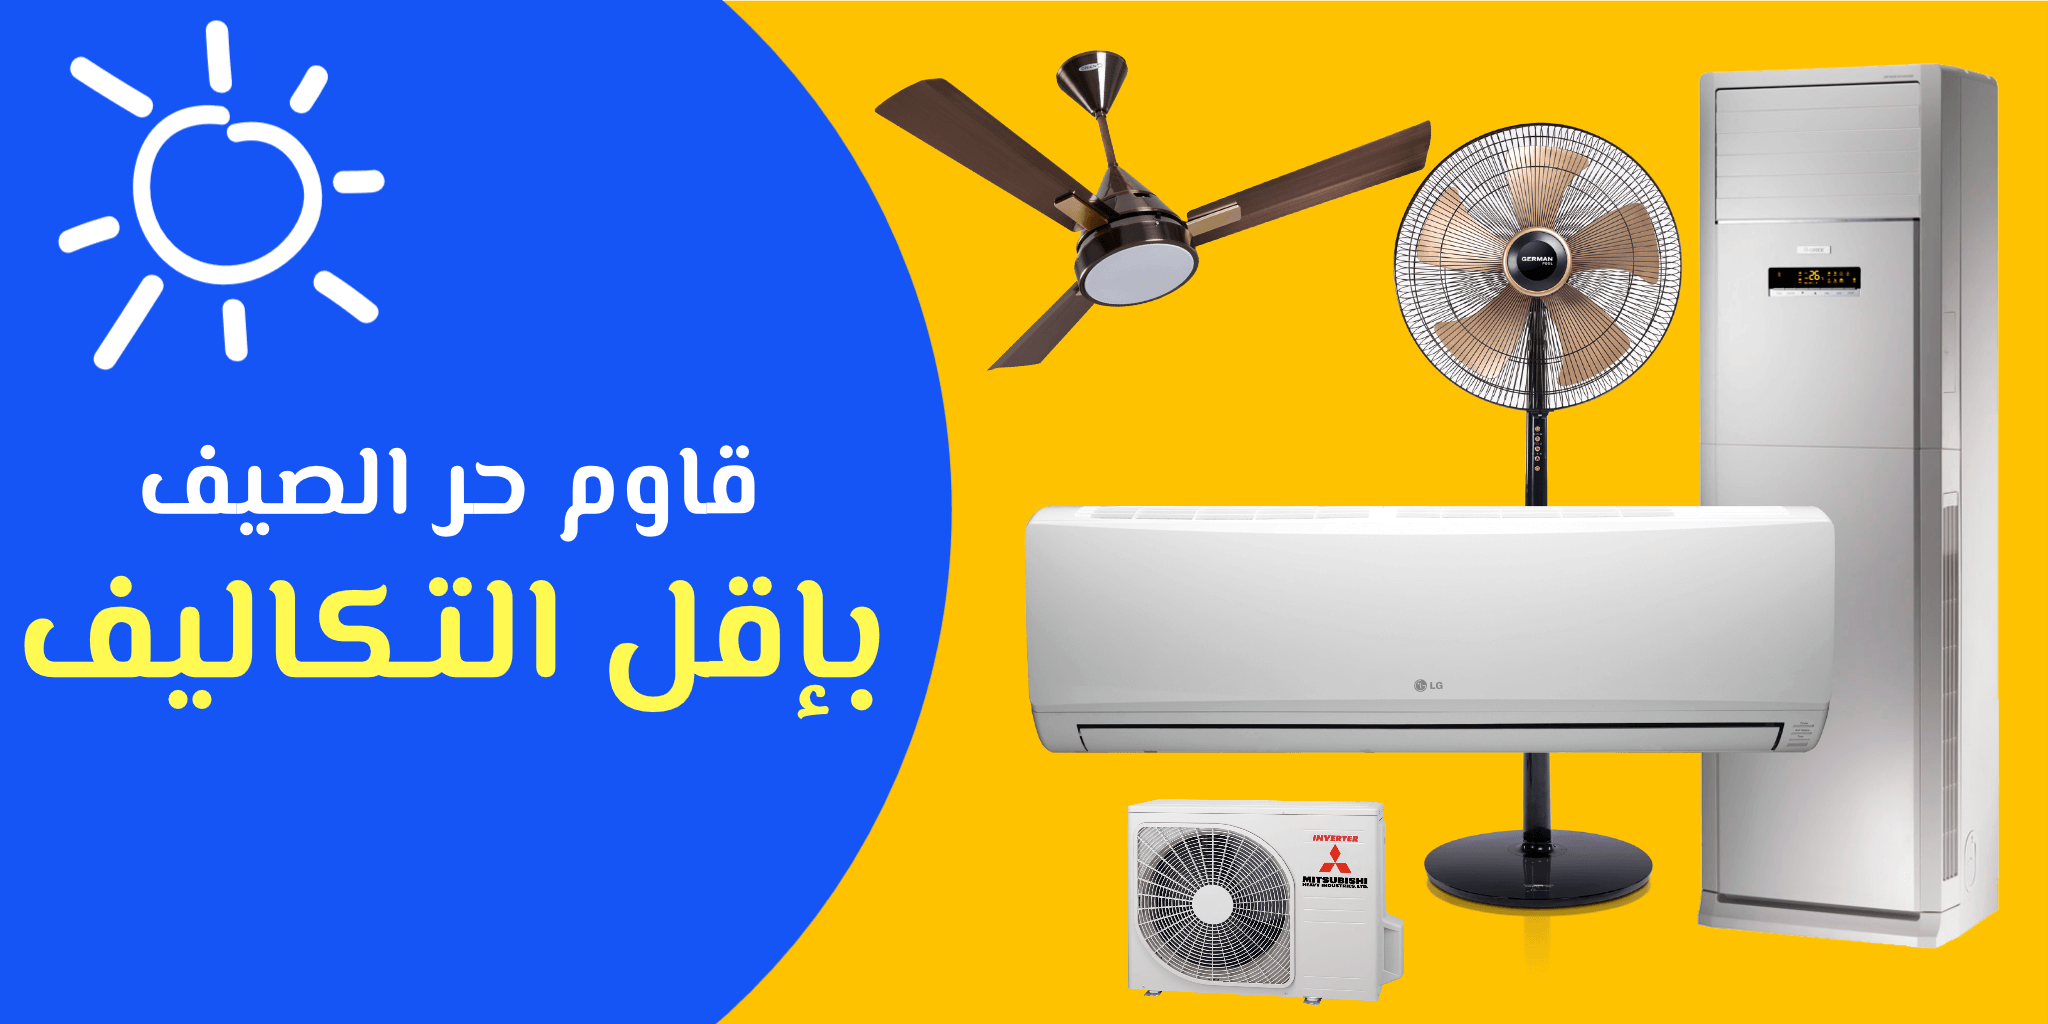 Best Prices 2 Air conditioning